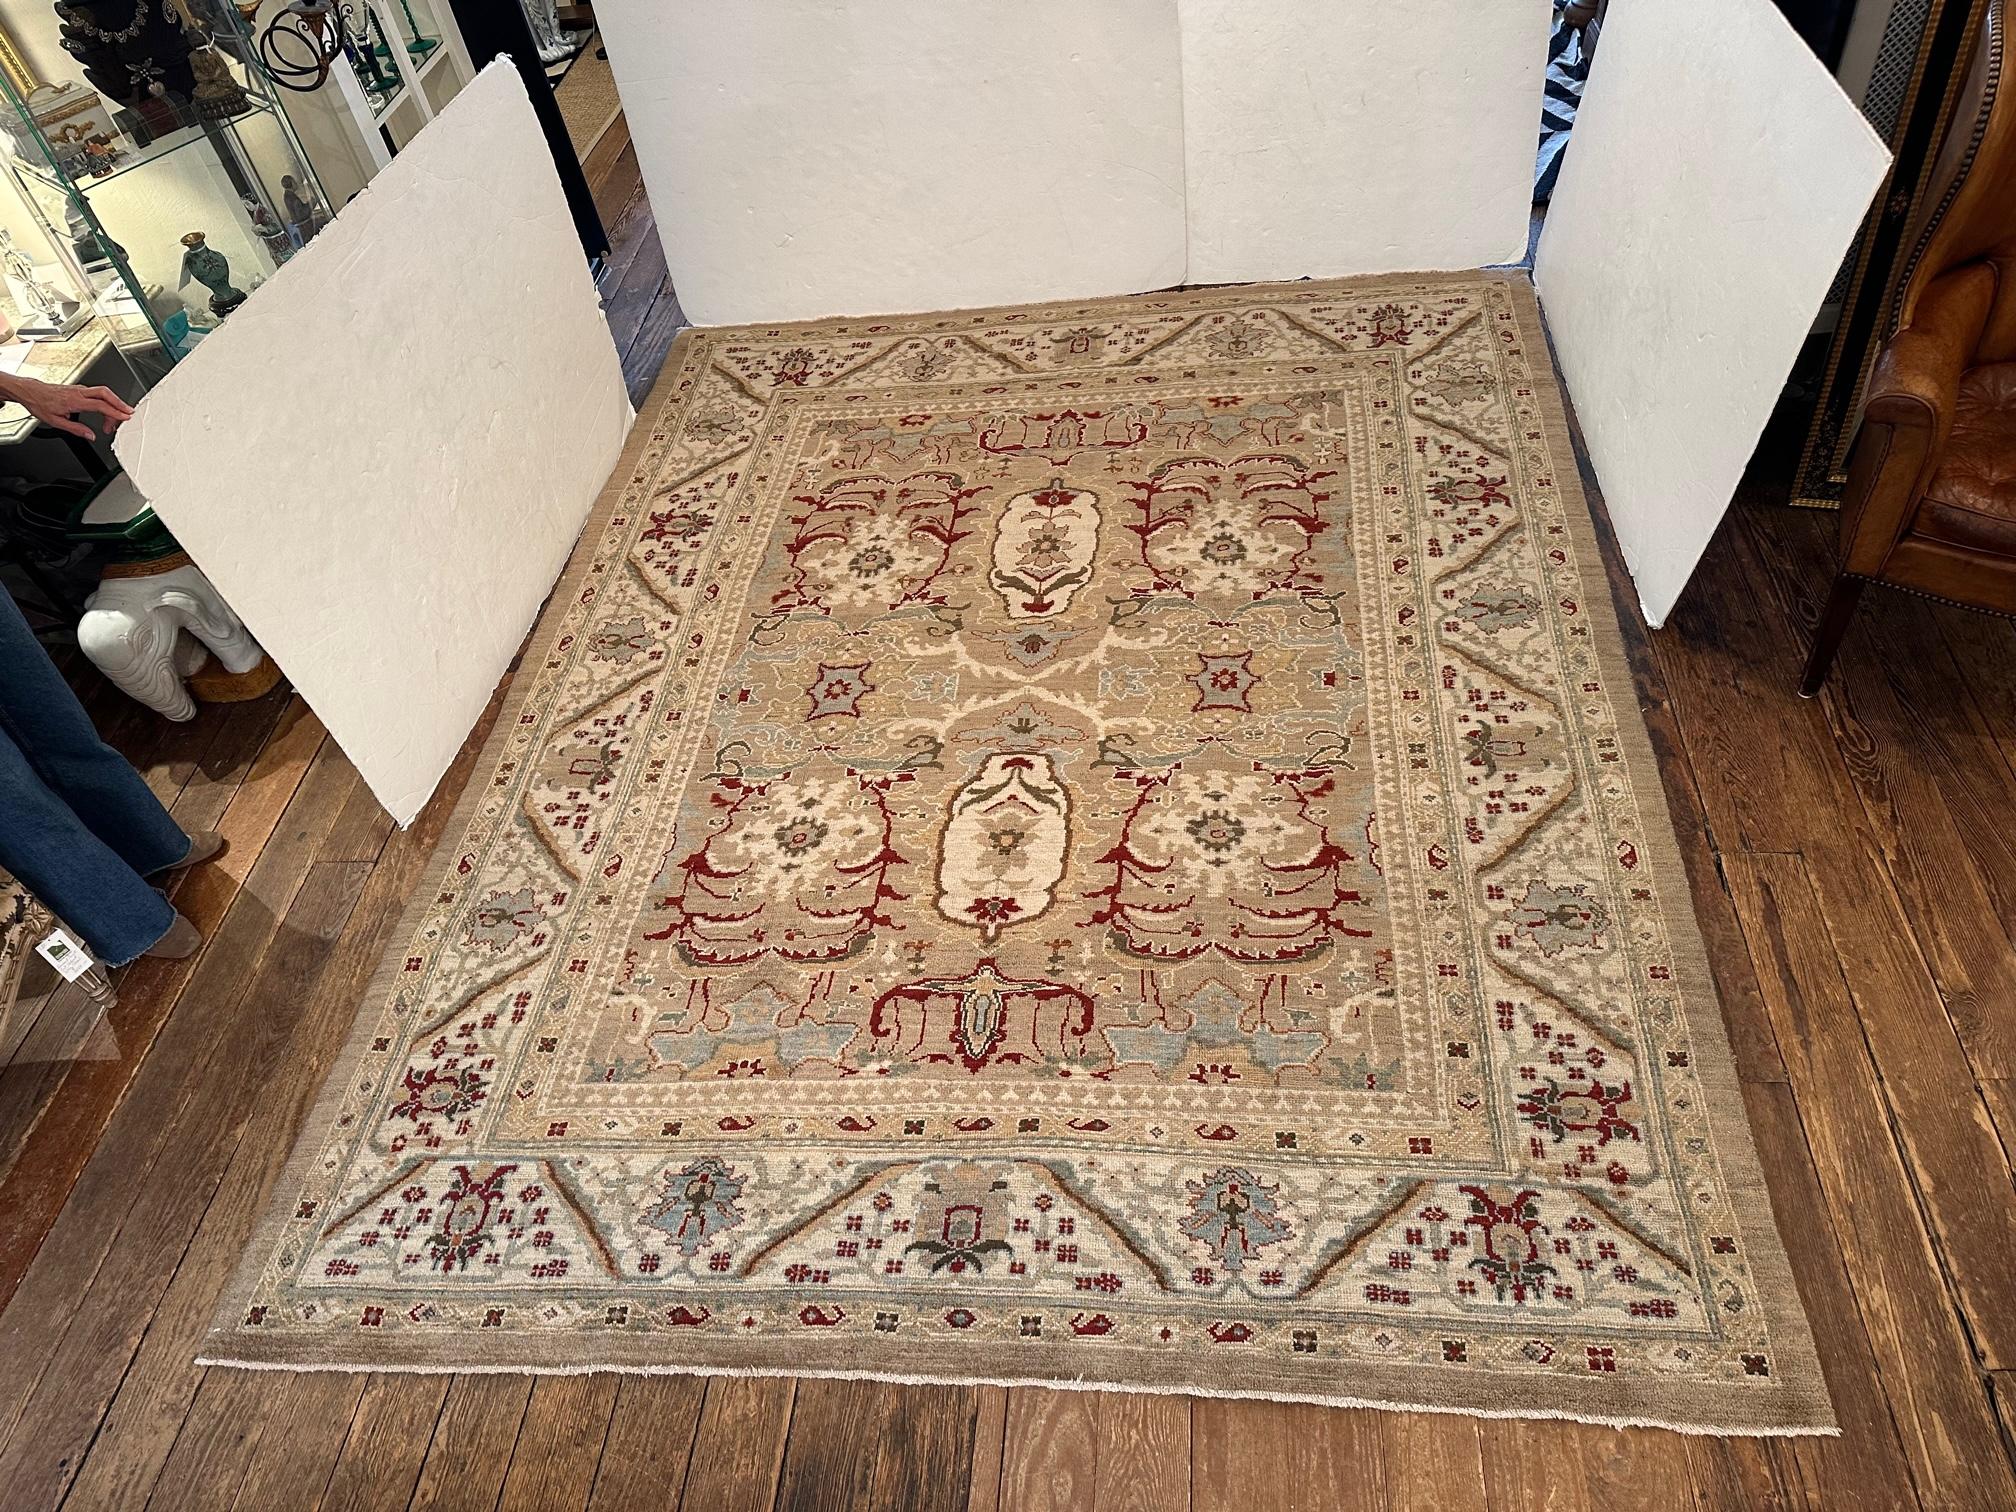 Contemporary, 8' x 10' Sultanabad style wool area rug from Turkey in muted shades of beige, cream, blue, and rusty red. Great condition, low pile.

Gayle 